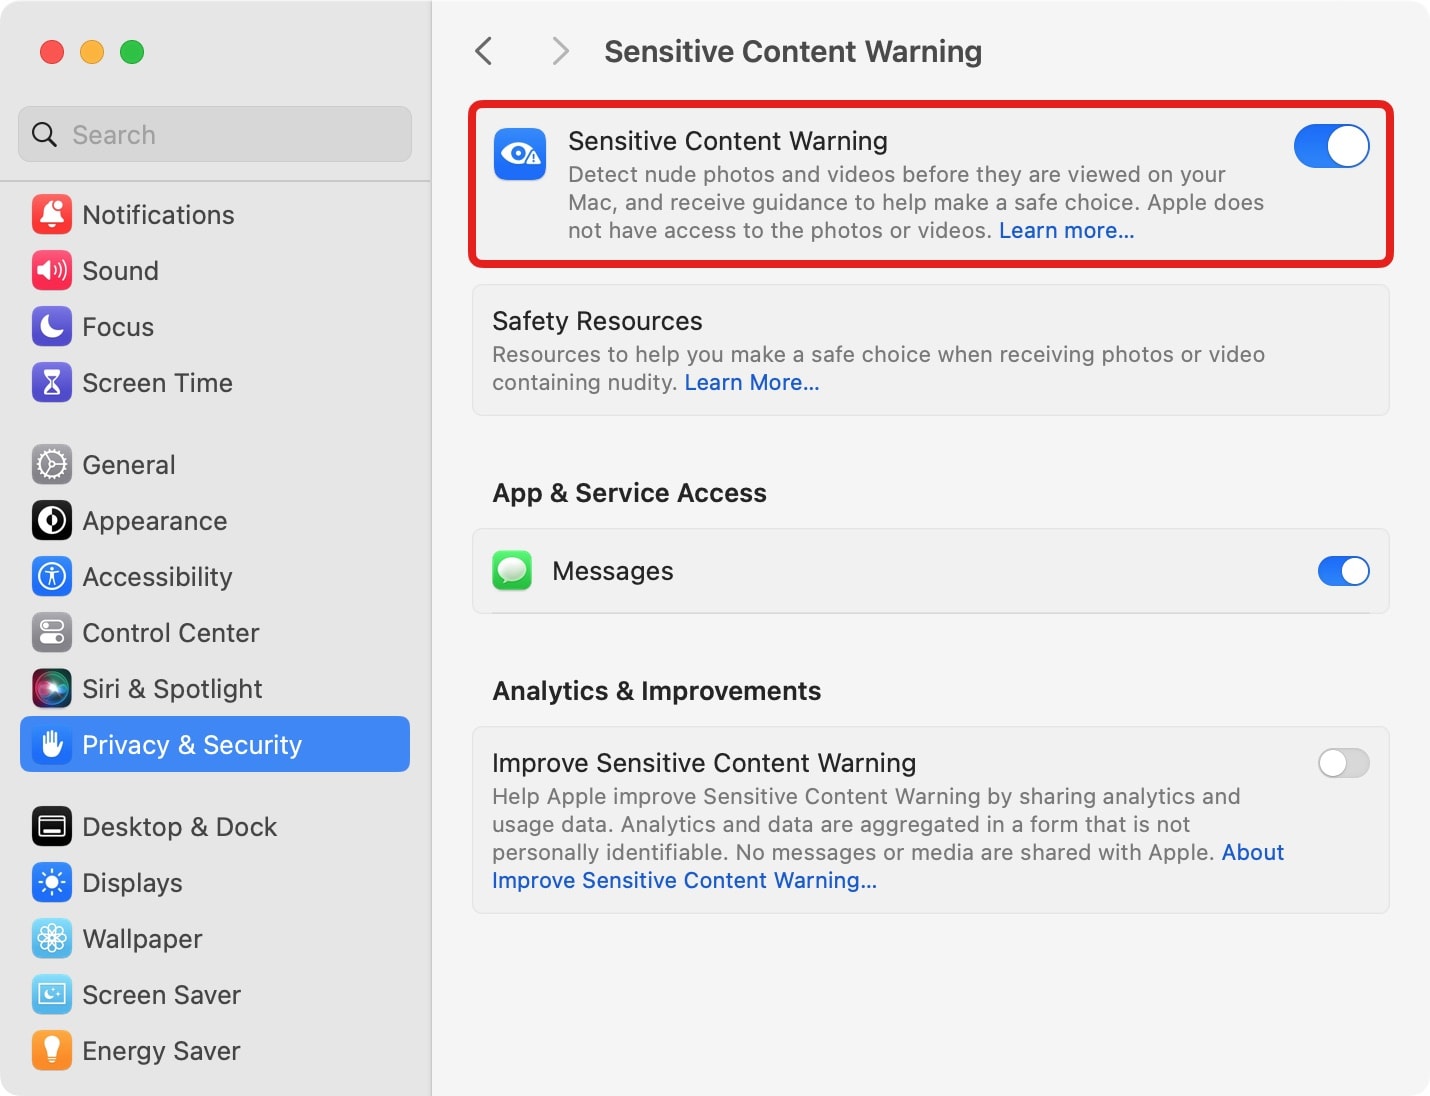 Turn on Sensitive Content Warnings in System Settings